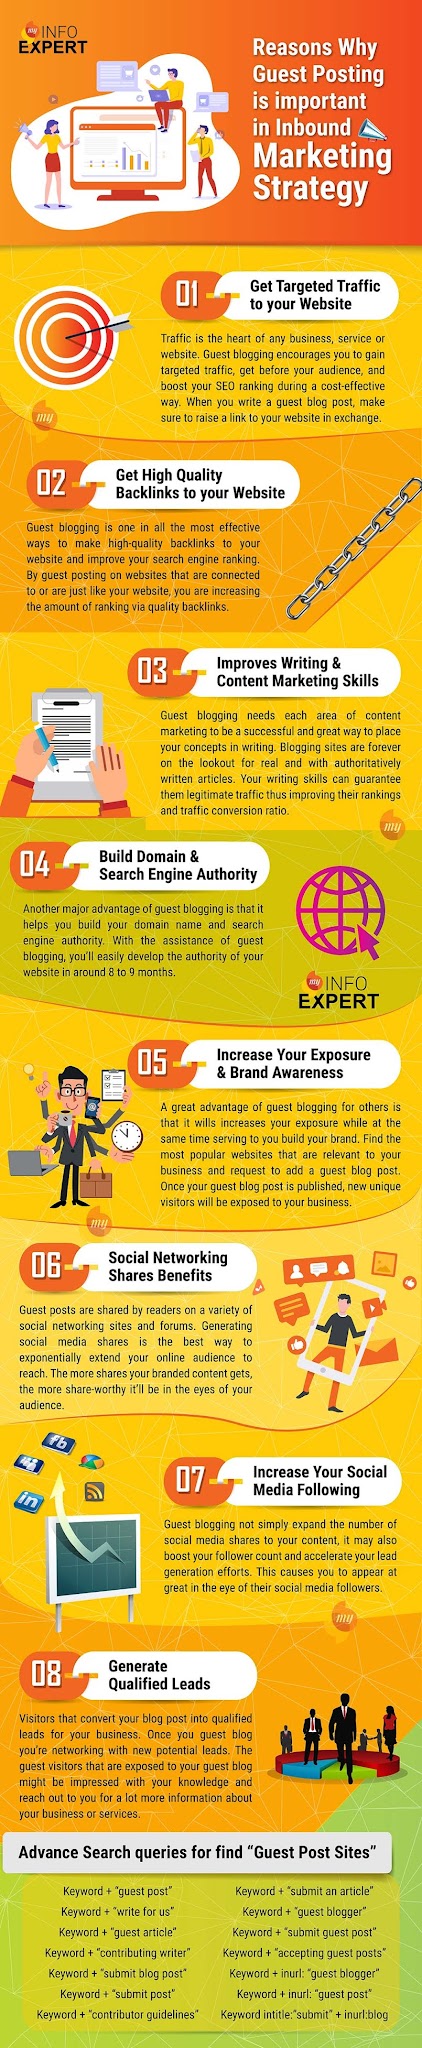 importance of guest posting infographic